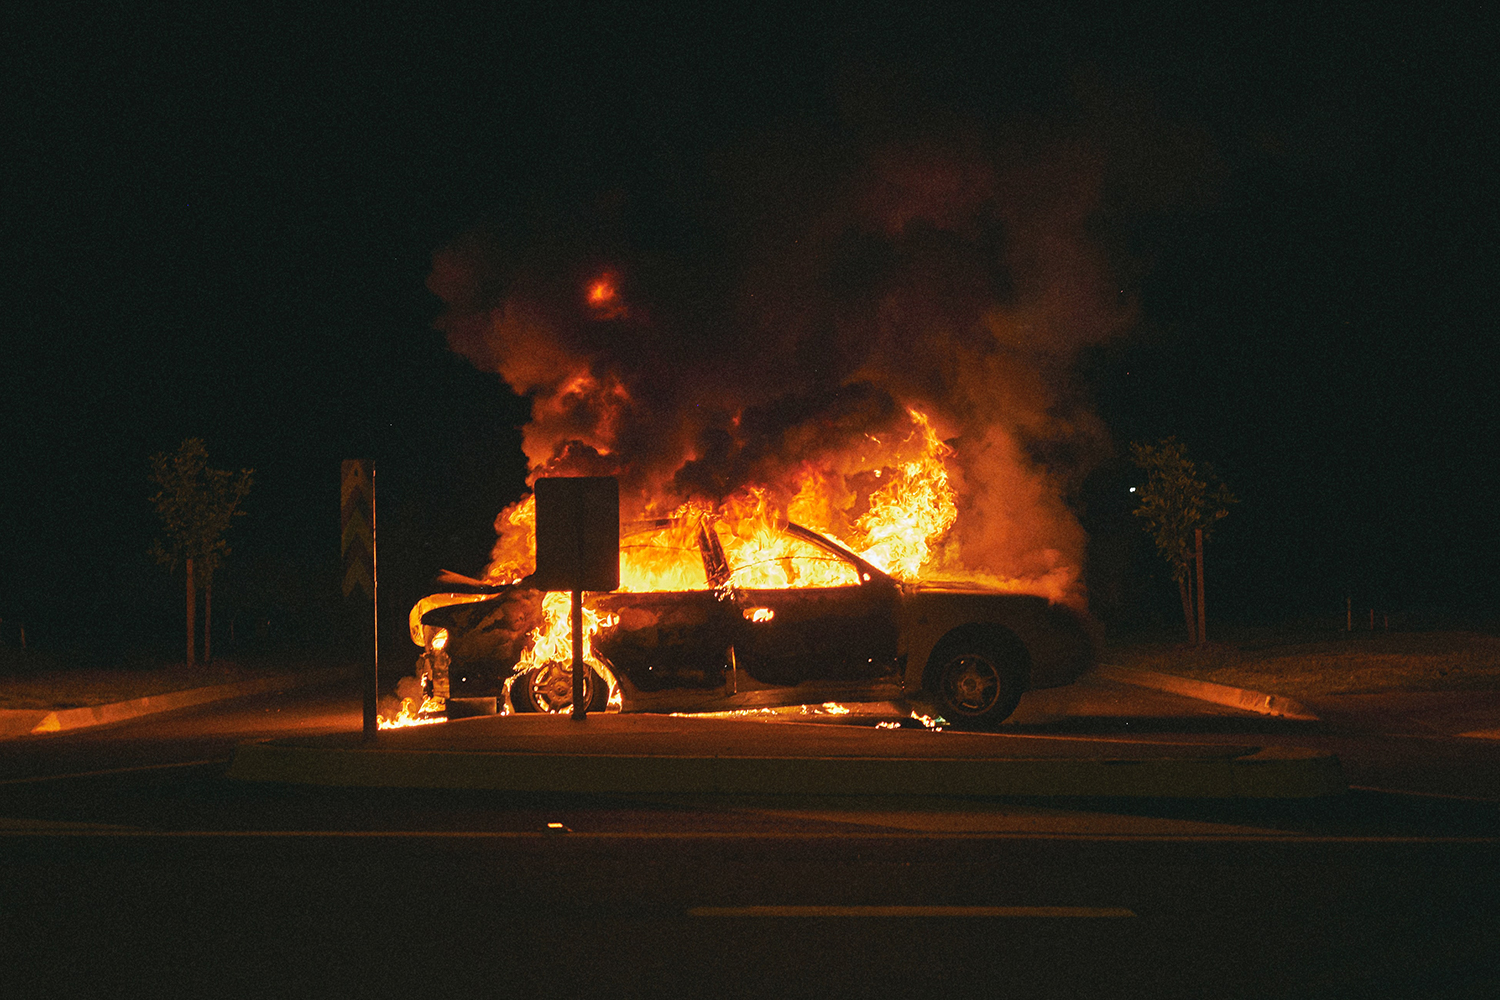 A four-door car on fire in a parking lot at night, with black smoke billowing up into the night sky